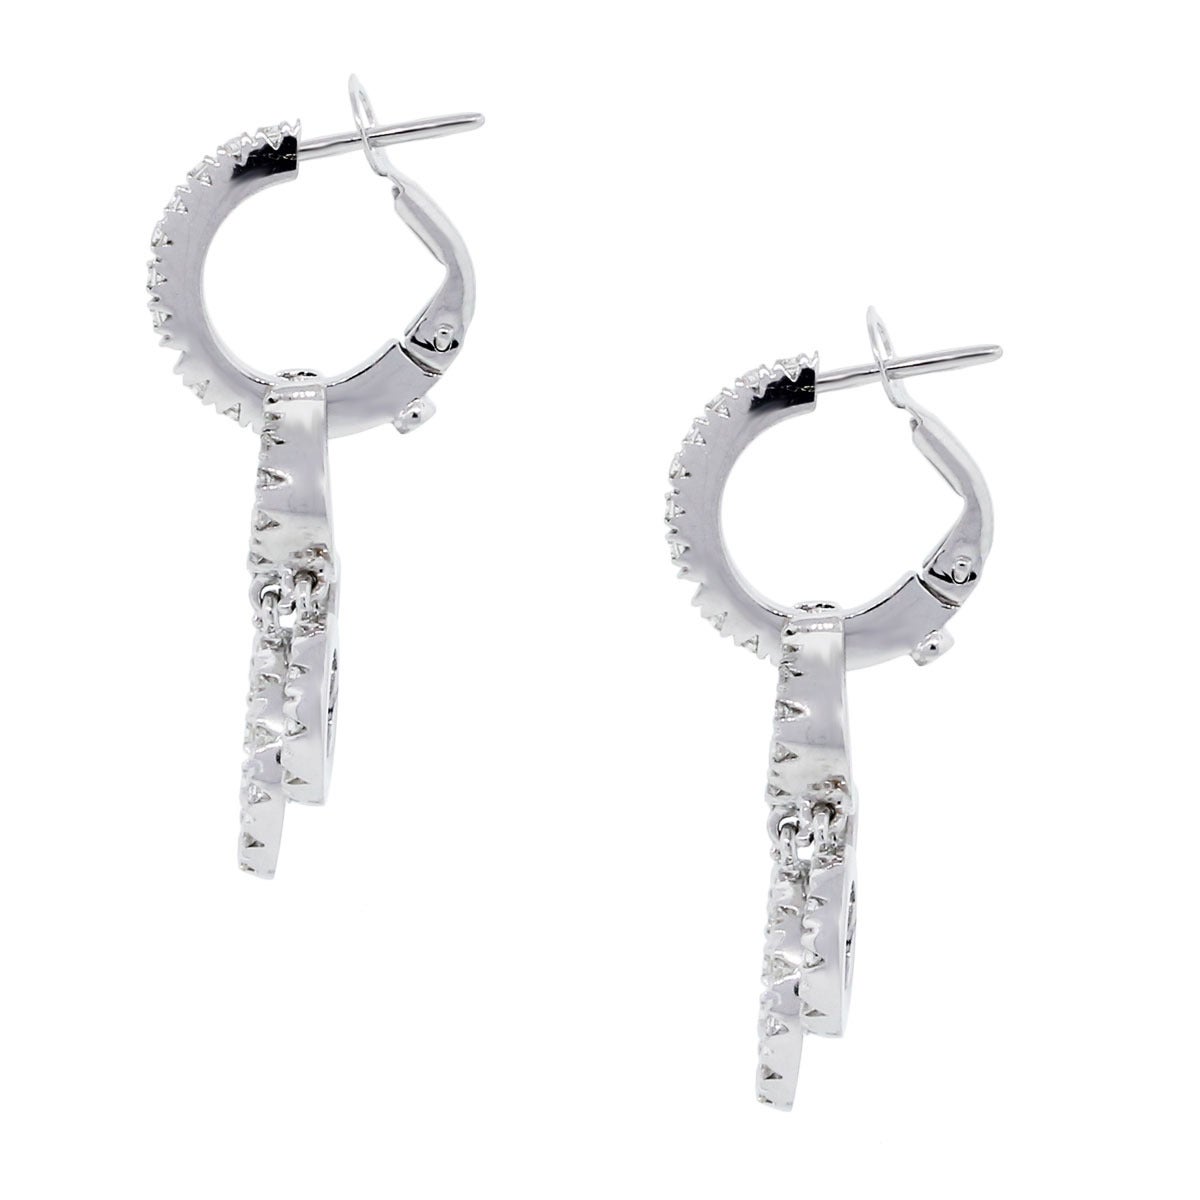 Metal: 18K White Gold
Diamonds Details: Round Brilliant Diamonds G in color and VS in clarity
Backs: Omega Backs
Item Weight: 6.8dwt (10.6g)
Earring Measurement: 1.25